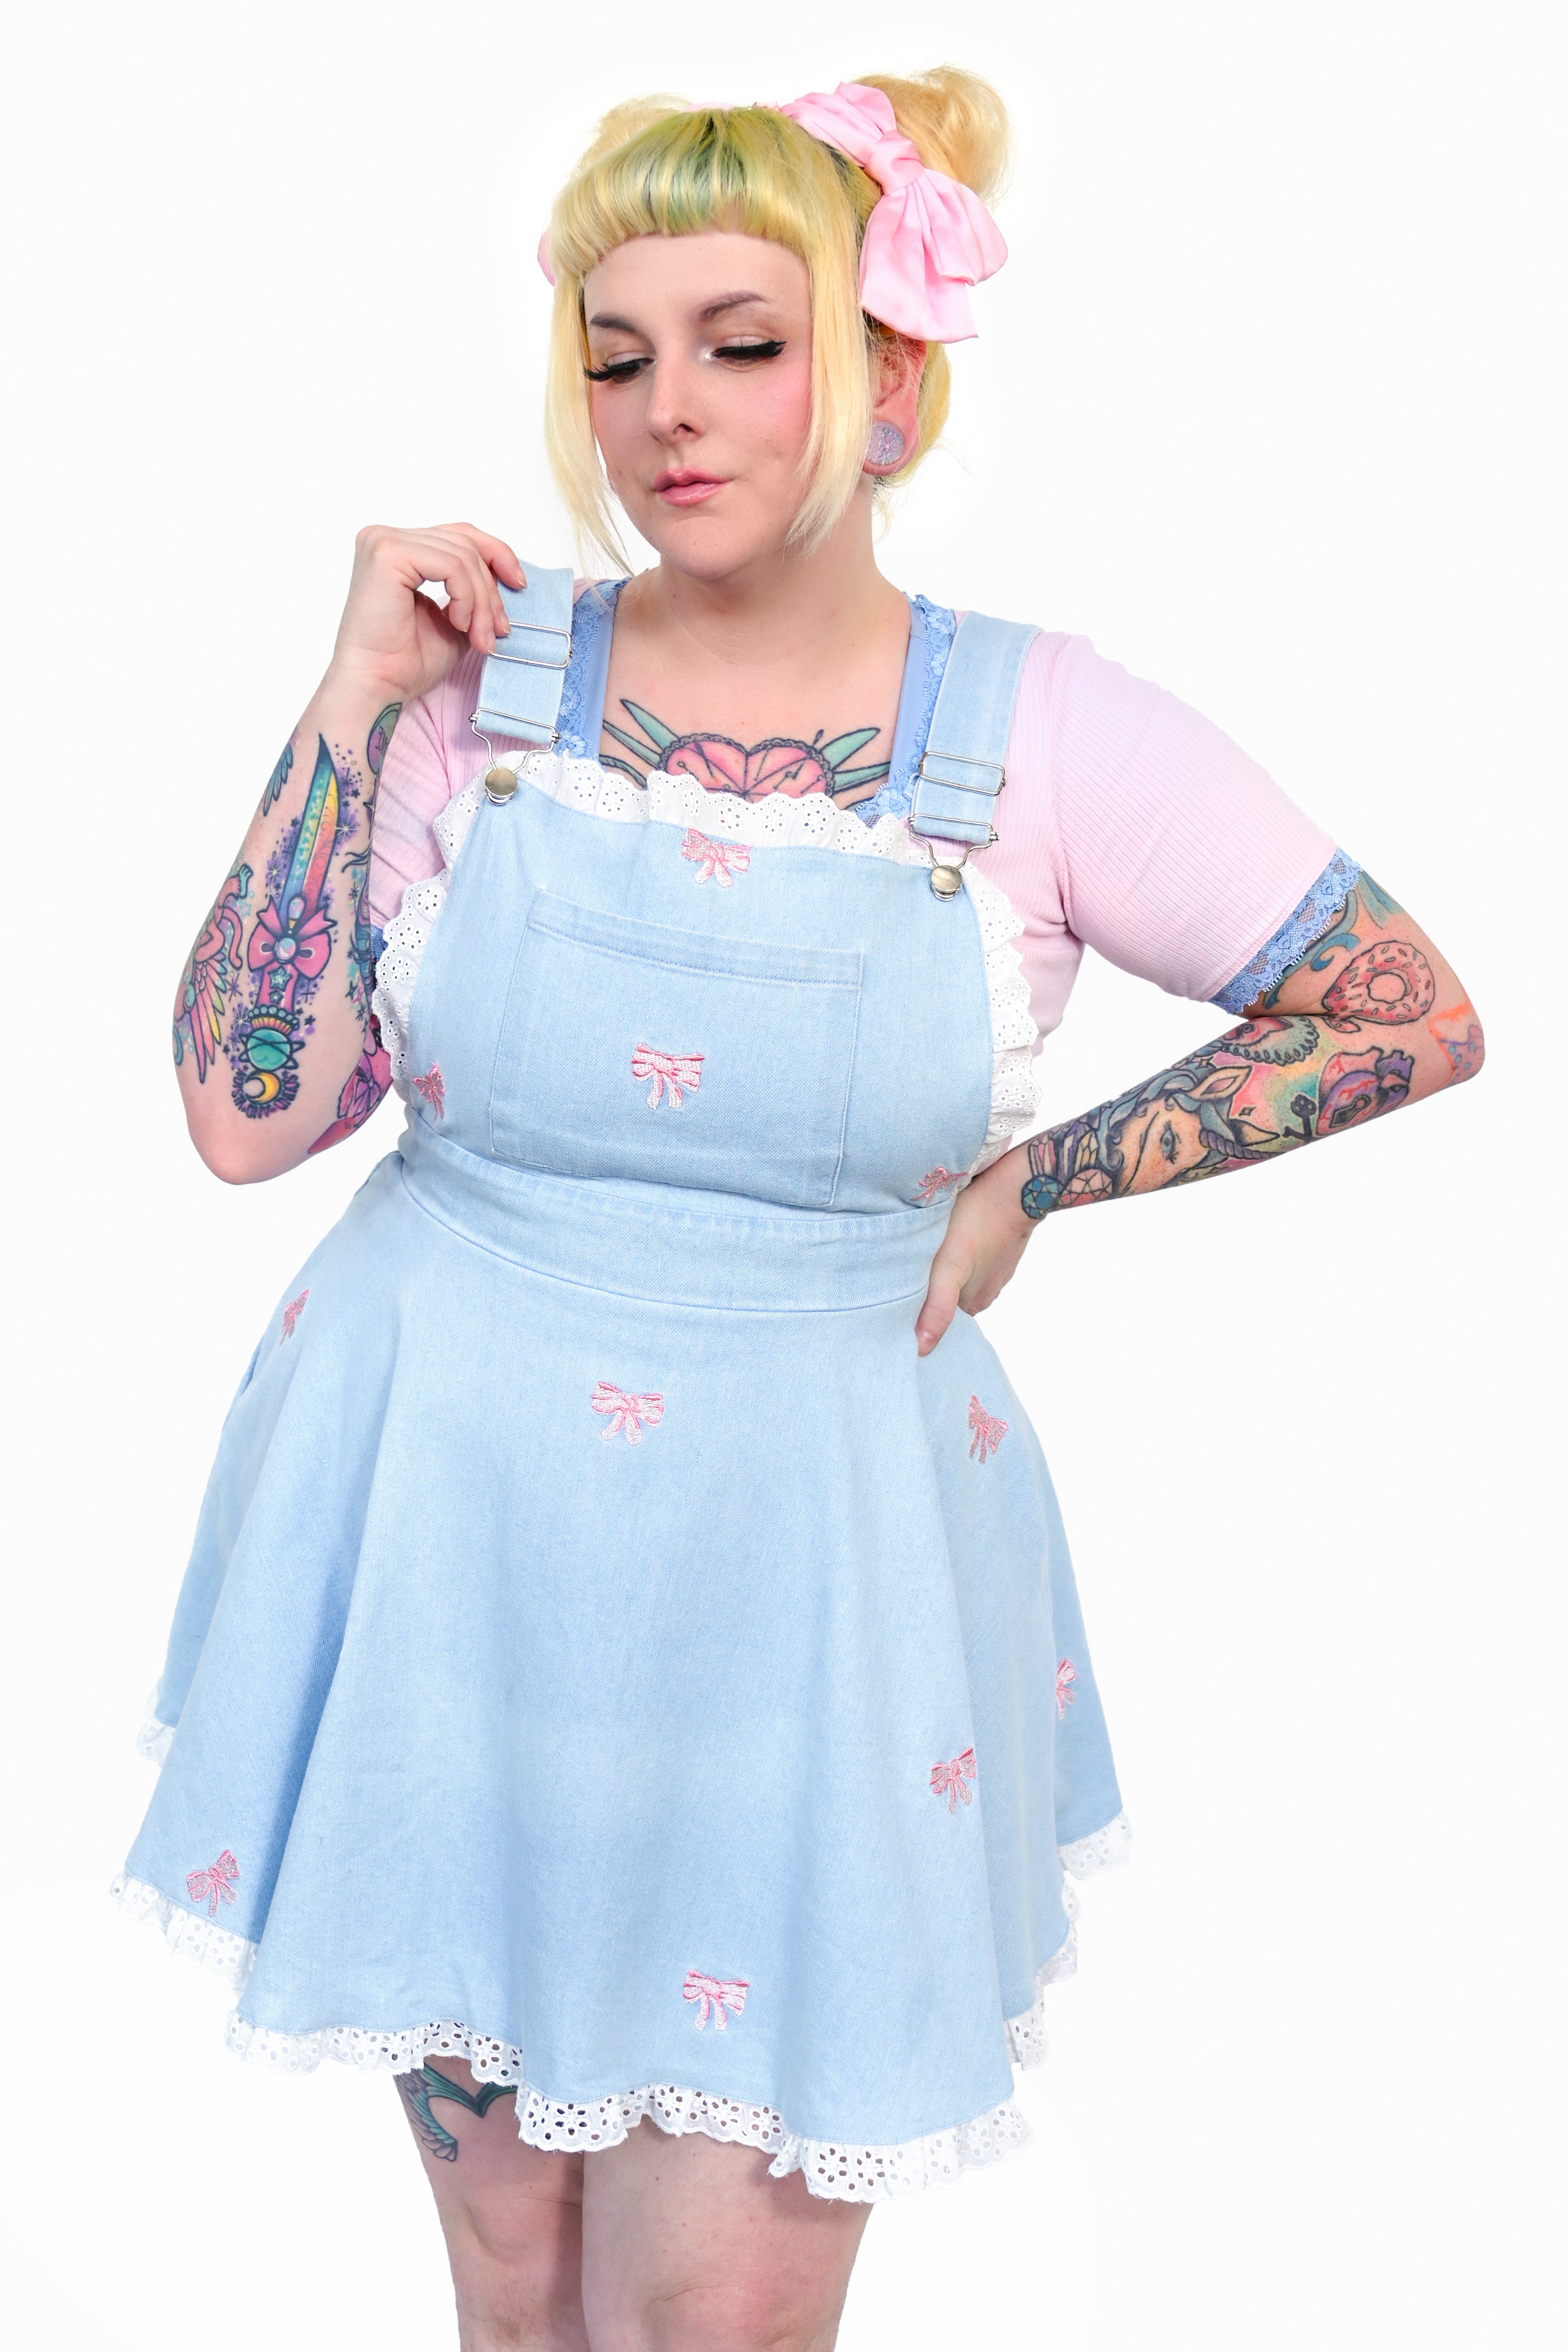 Light wash denim pinafore with eyelet lace ruffle trum and embroidered pink bows all over